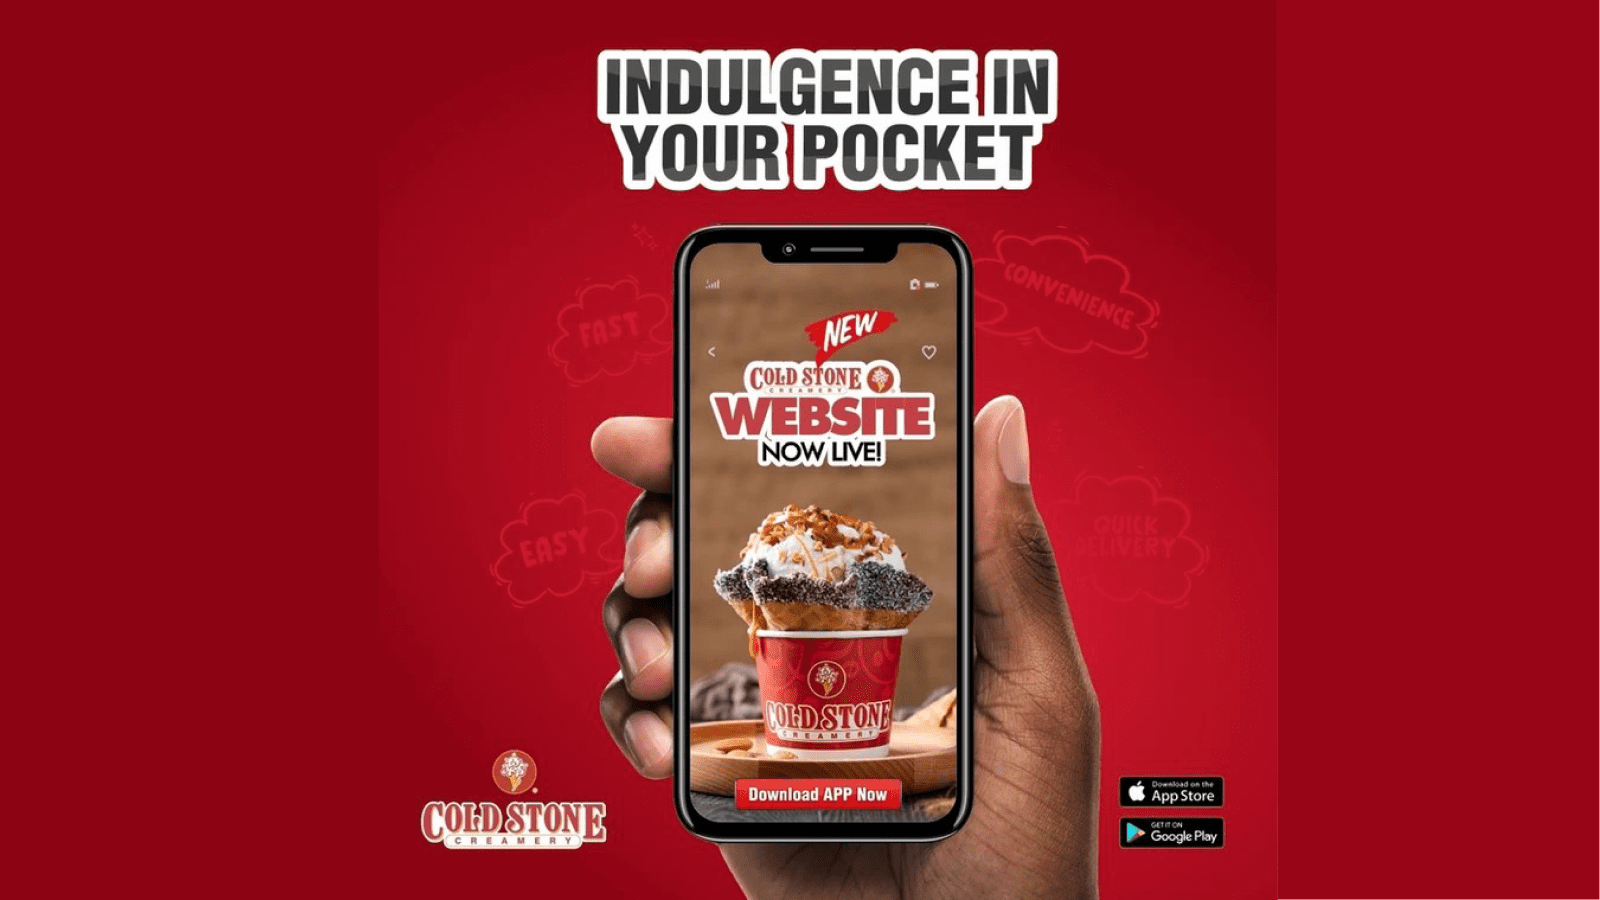 Cold Stone Creamery Nigeria launches online ordering platform, unveiling indulgence in consumers reach